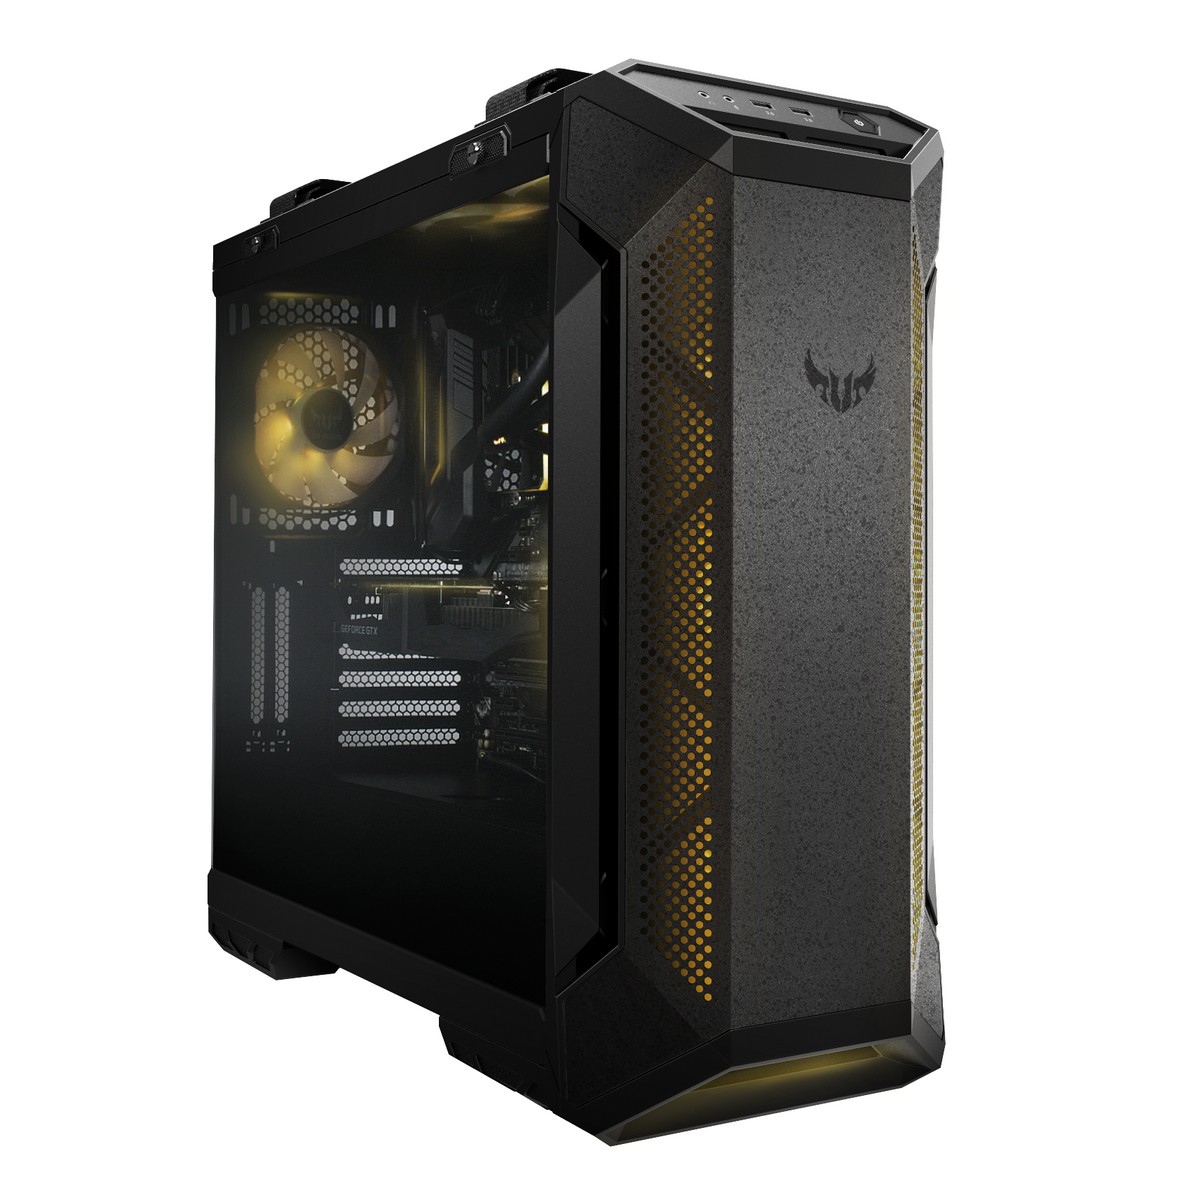  - ASUS TUF Gaming GT501 Midi-Tower Case - Black Tempered Glass